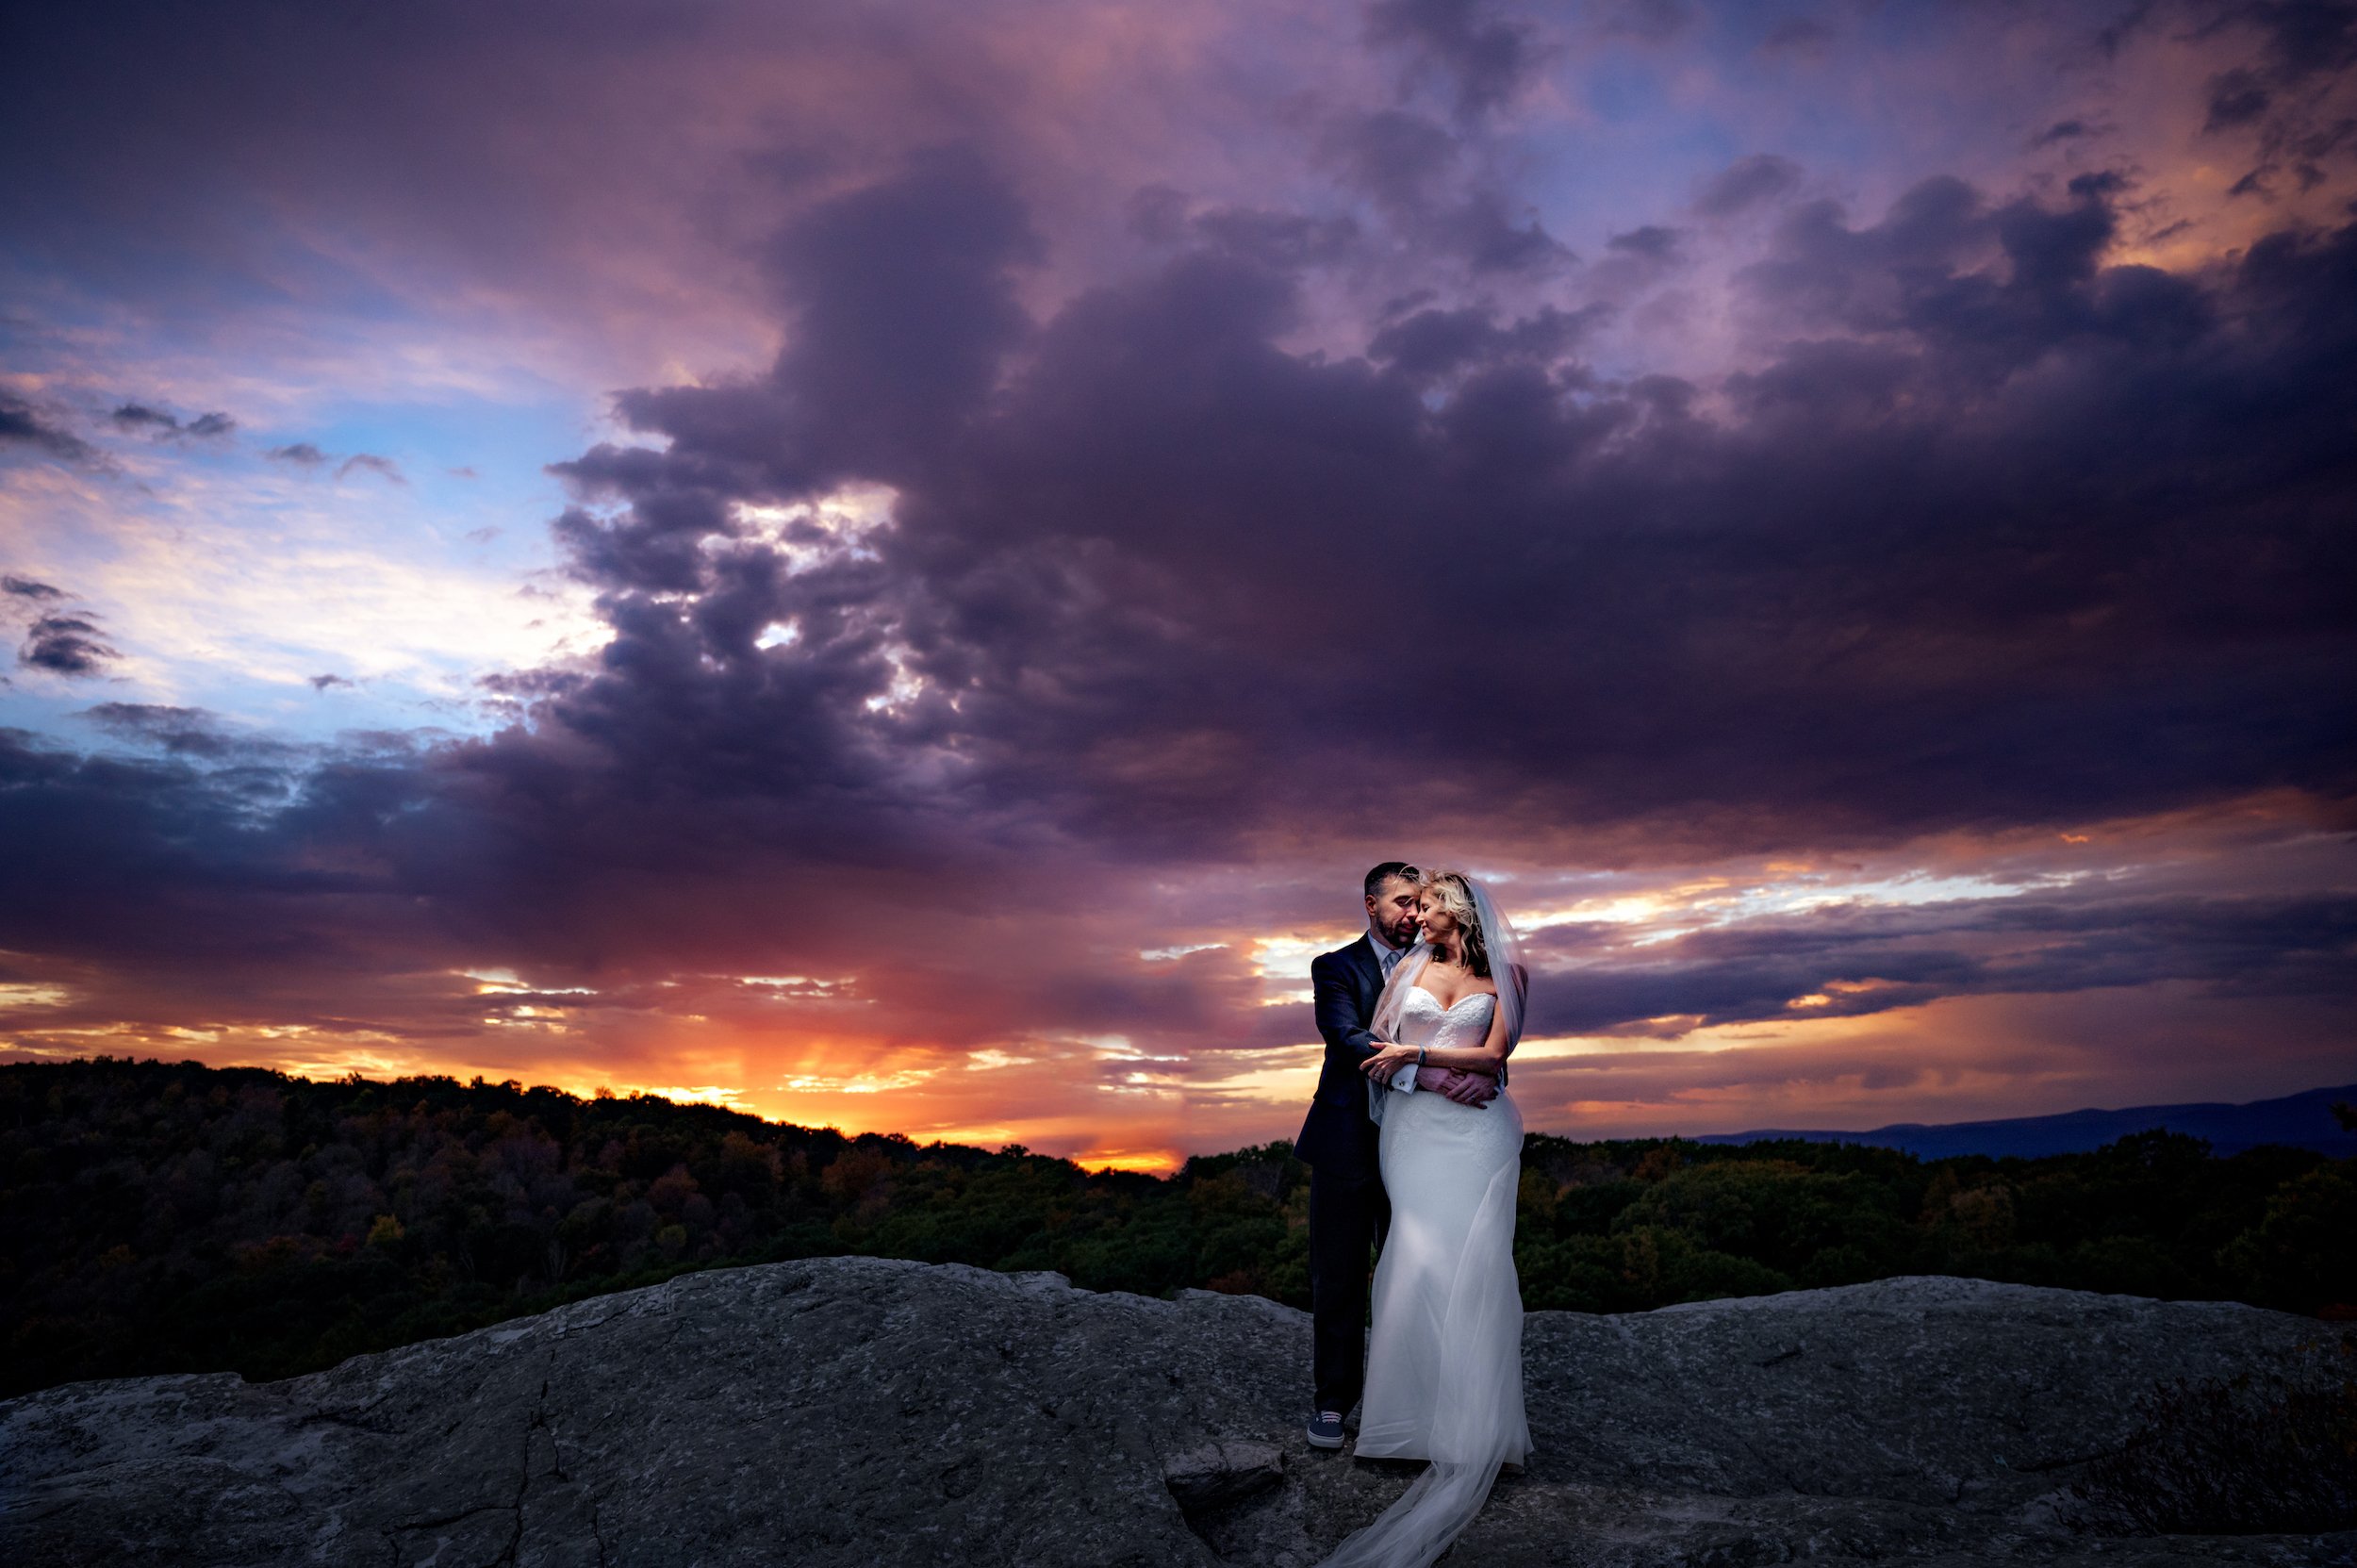 Jeff_Tisman_Photography_Jill_and_Mike_Vow_Renewal_16_Bride_and_Groom_Pose_on_Shawangunk_Mountain_Sunset.jpg